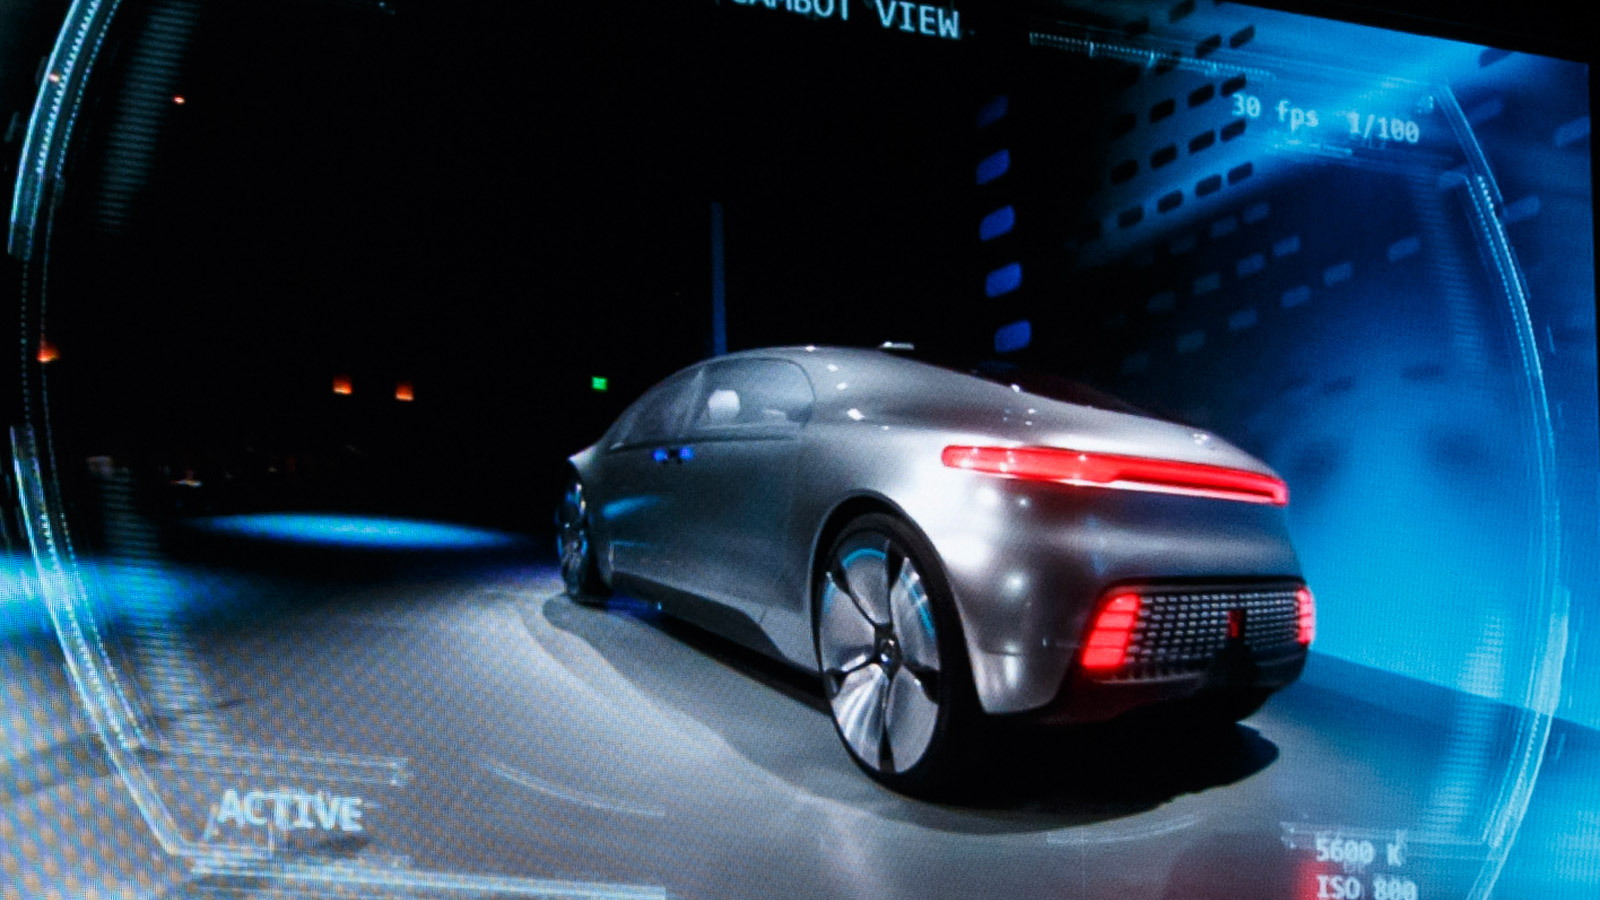 Mercedes-Benz F015 Luxury in Motion concept, 2015 Consumer Electronics Show